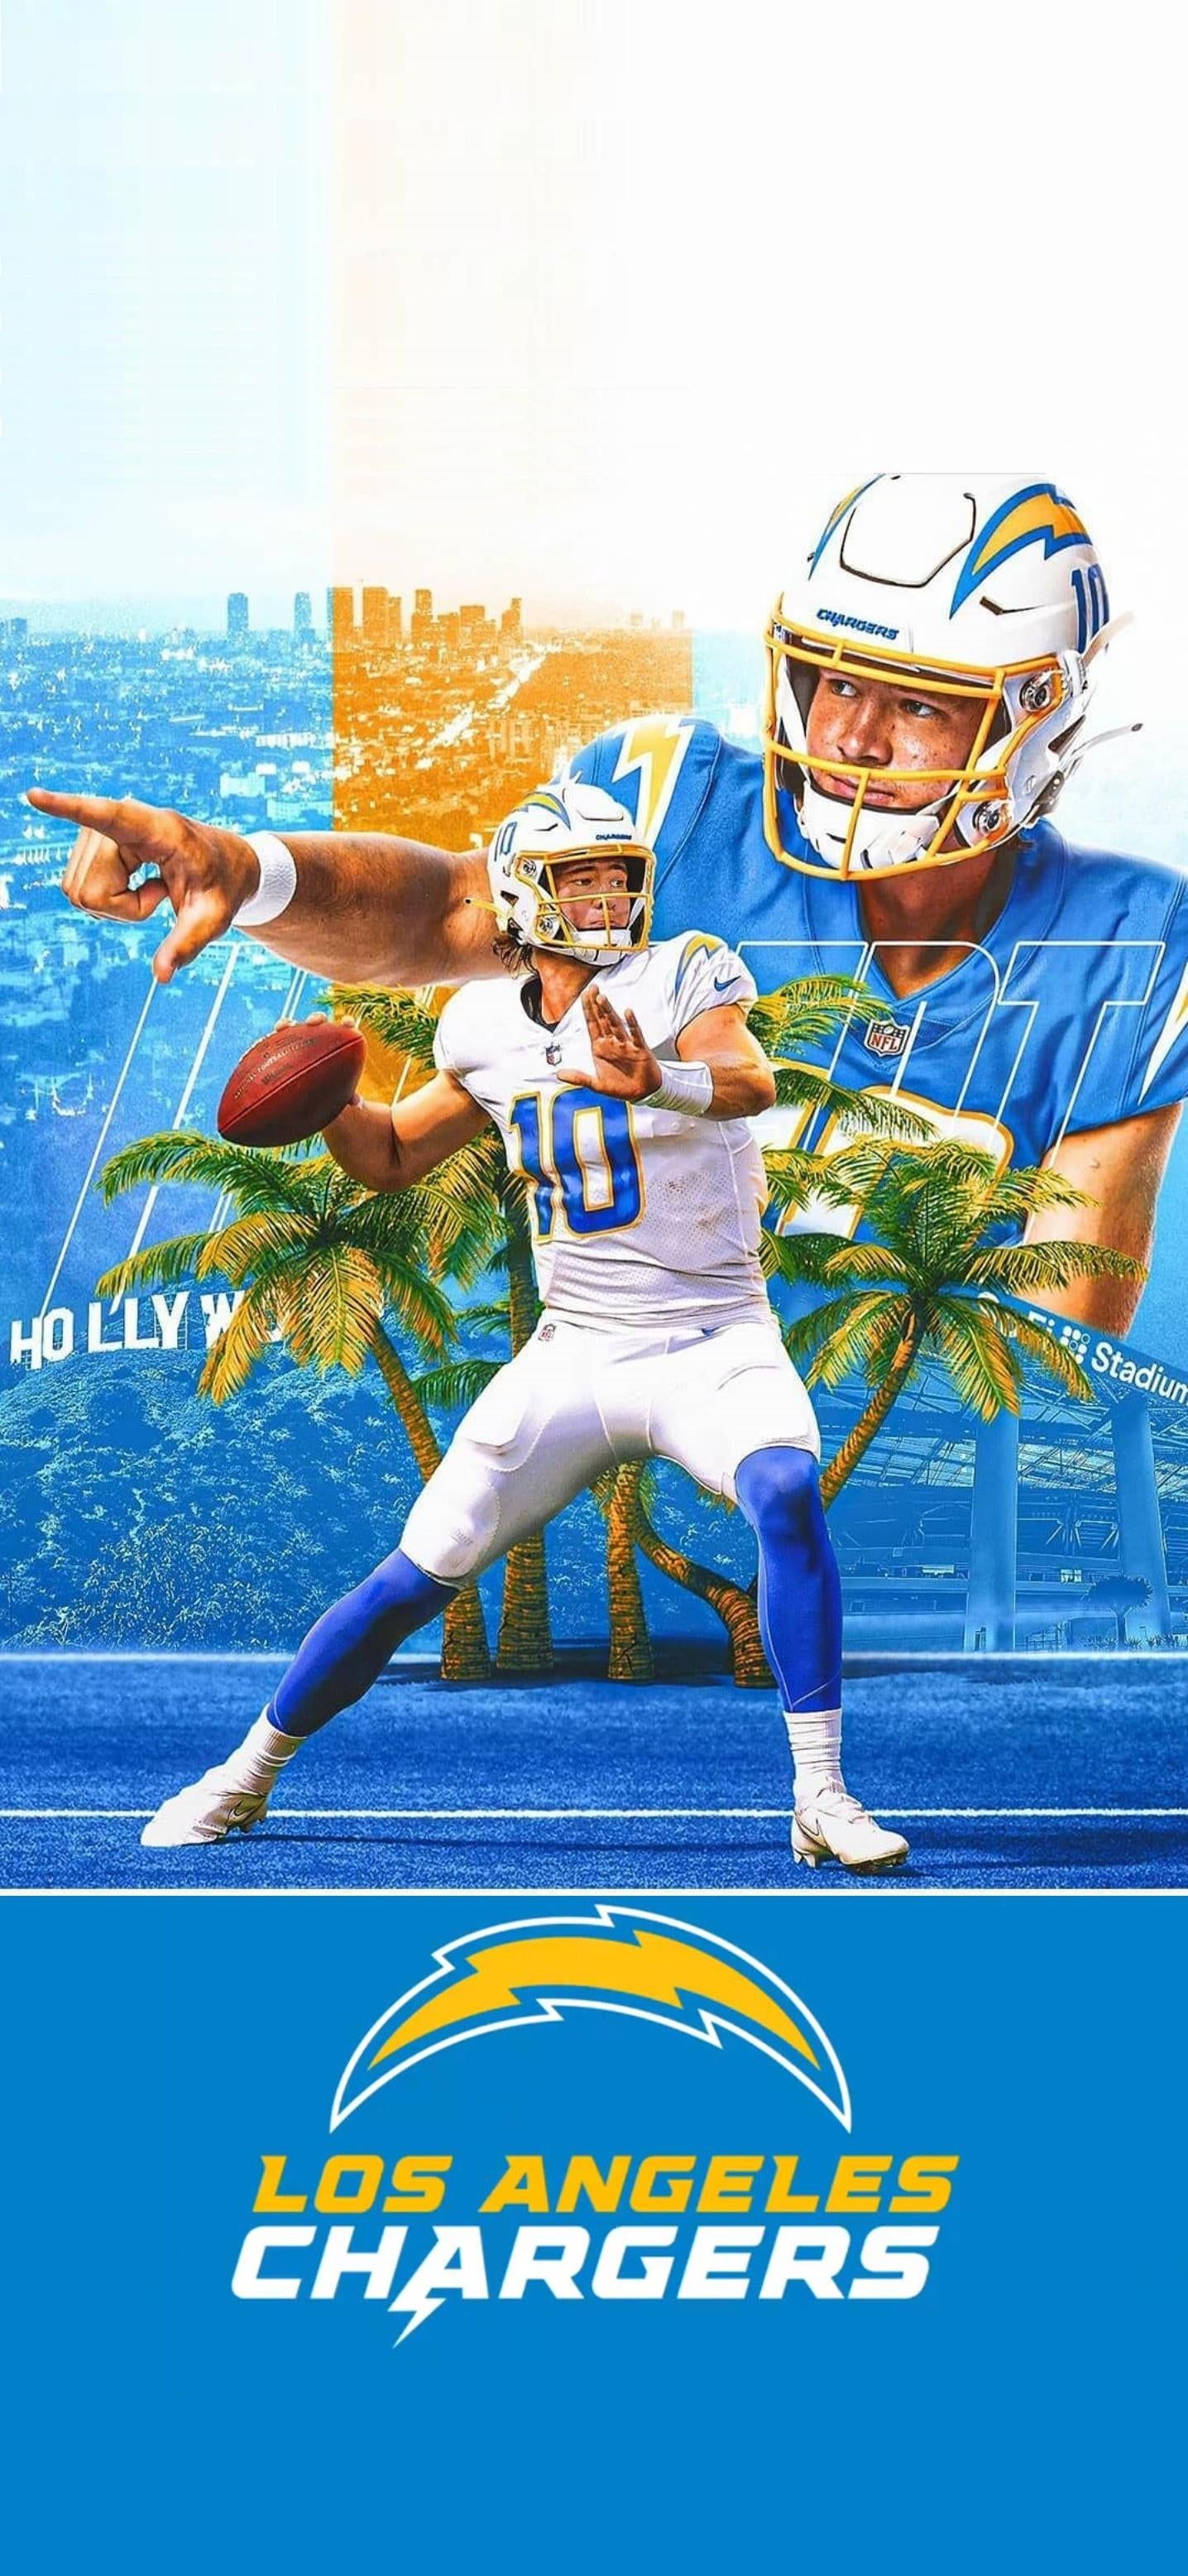 Los Angeles Chargers on Twitter this is the way MNF  BoltUp  httpstcoce1tu24zMg  Twitter